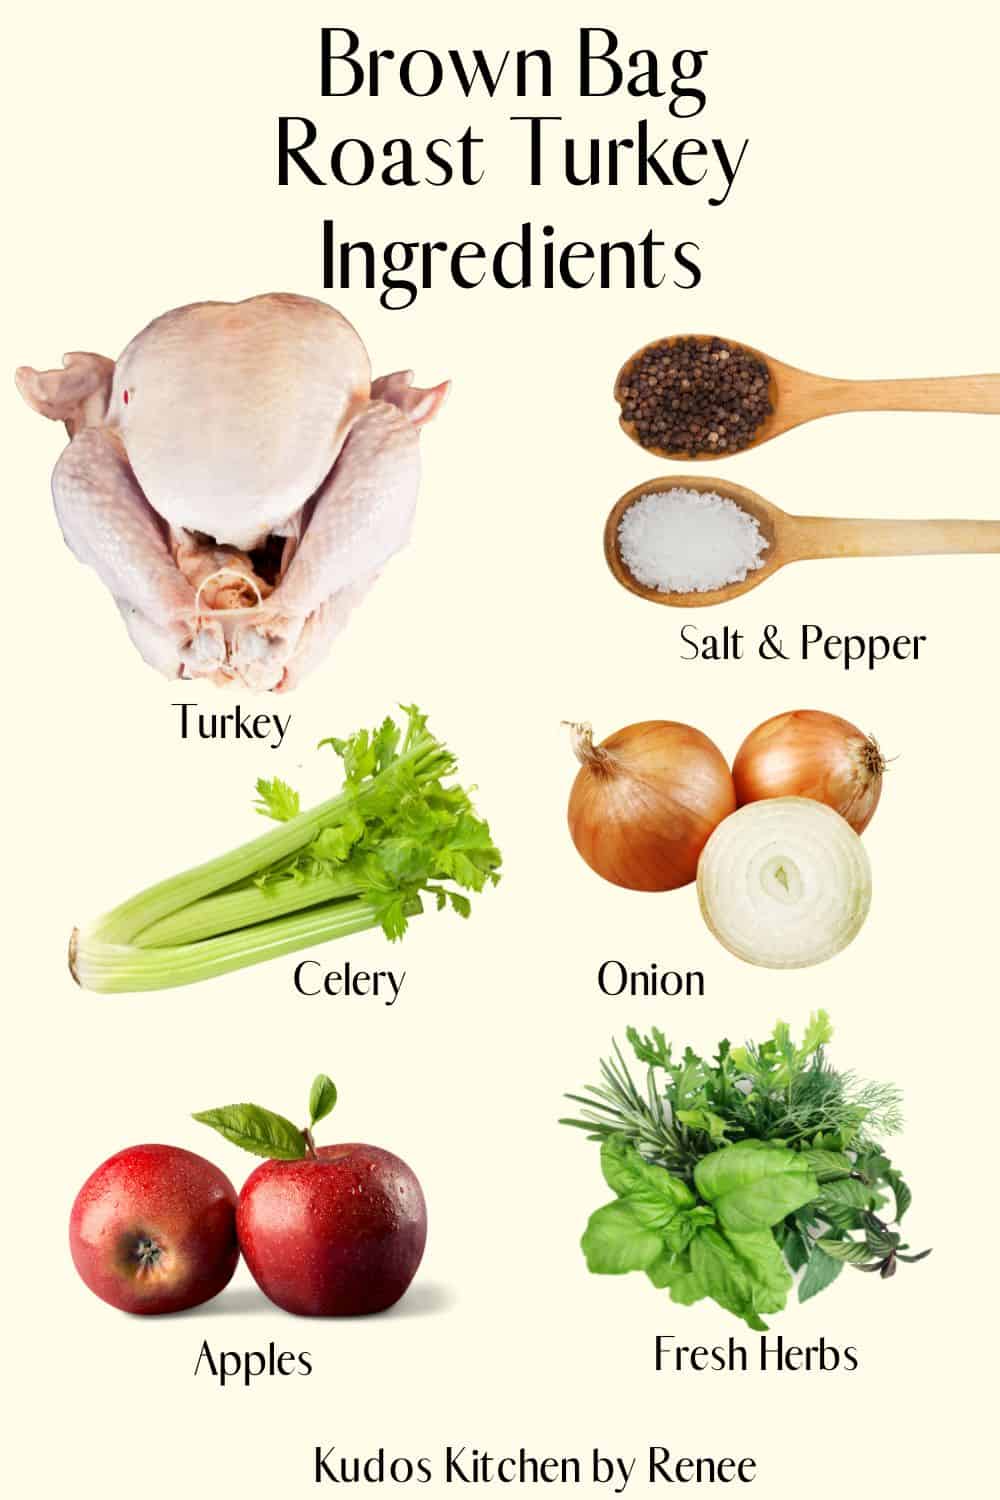 A visual ingredient list for how to make Brown Bag Roast Turkey with text and images.